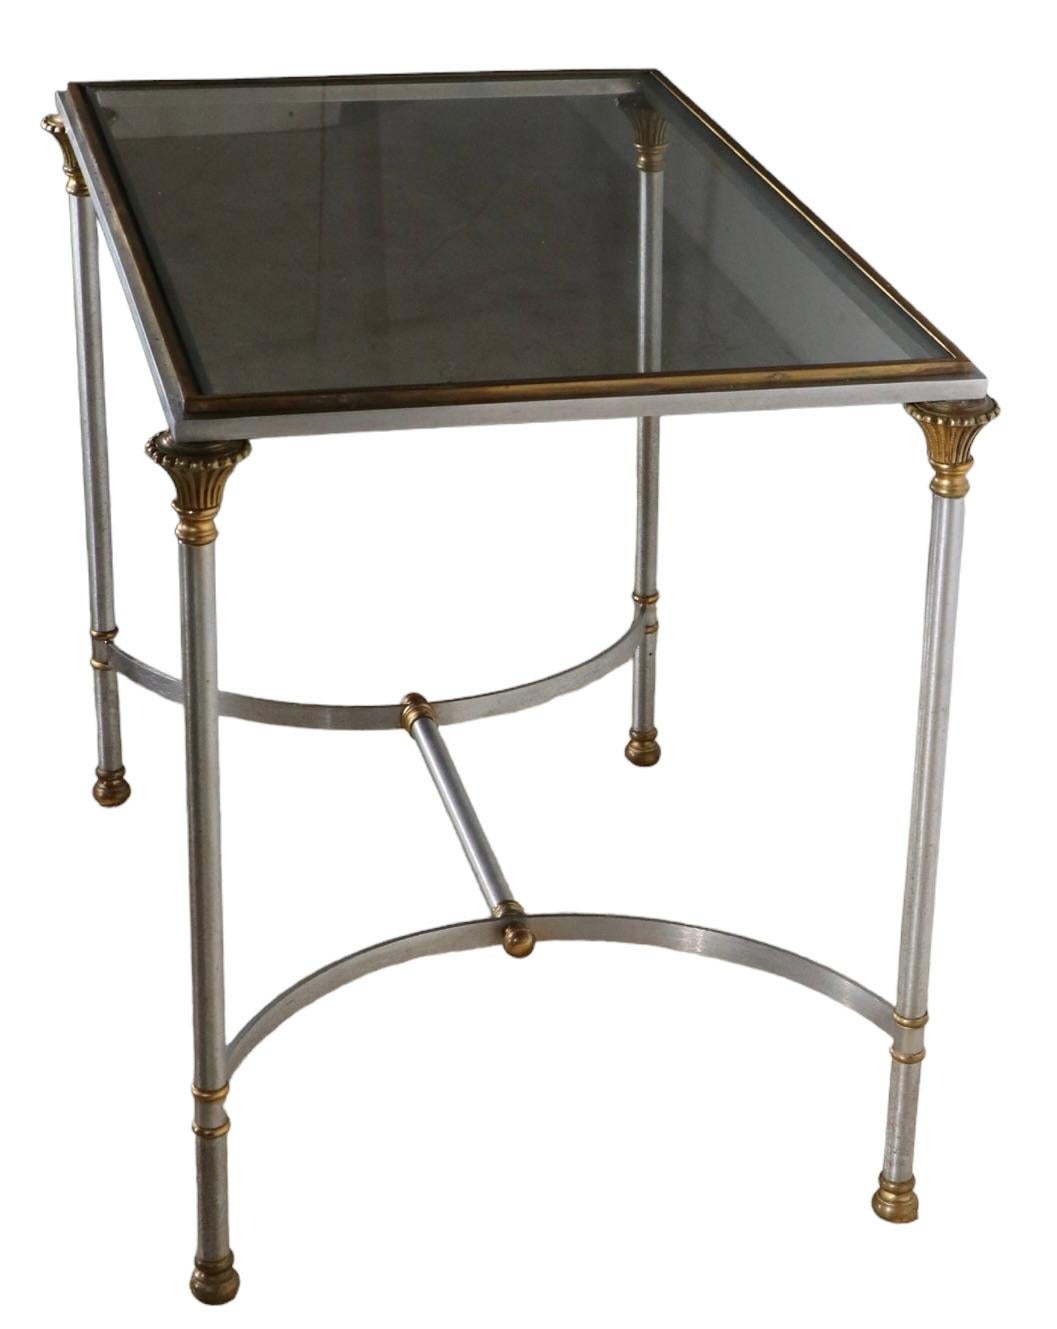 20th Century   Classical Steel Brass and Glass End Table Made in Italy att. to  Maison Jansen For Sale